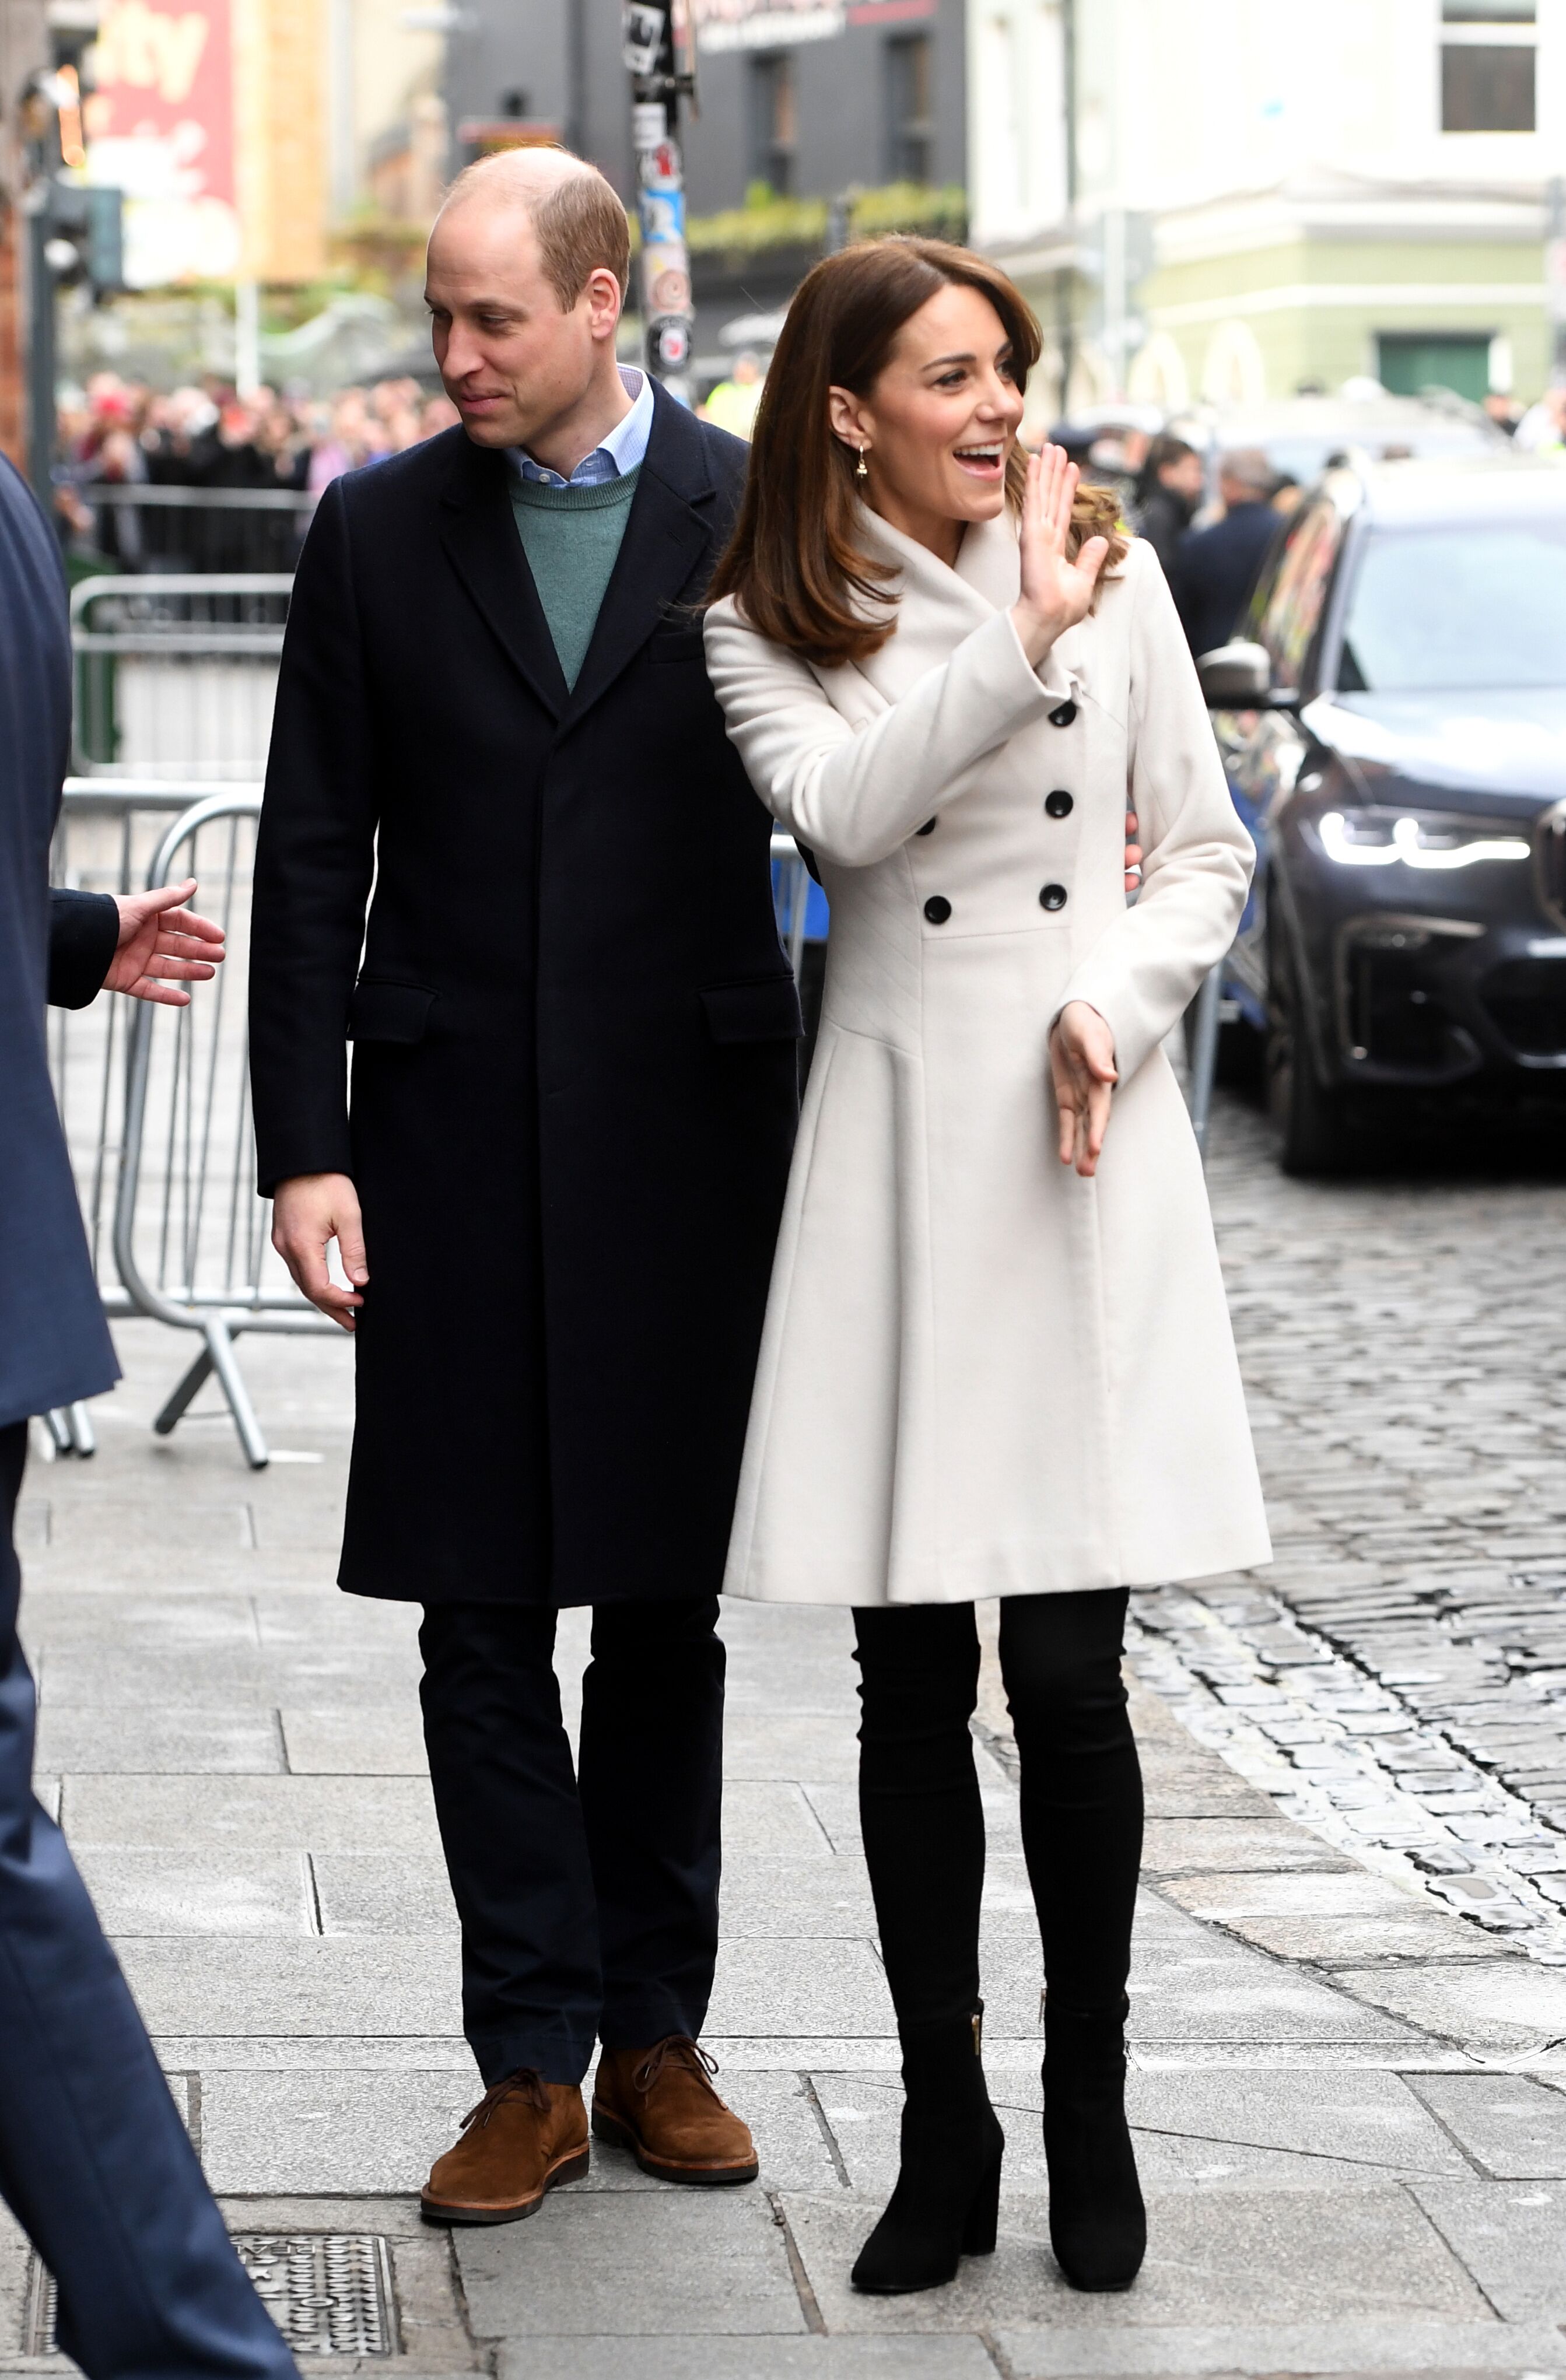 Prince William and Duchess Kate visit Jigsaw during day two of their visit to Ireland on March 04, 2020, in Dublin. | Source: Getty Images